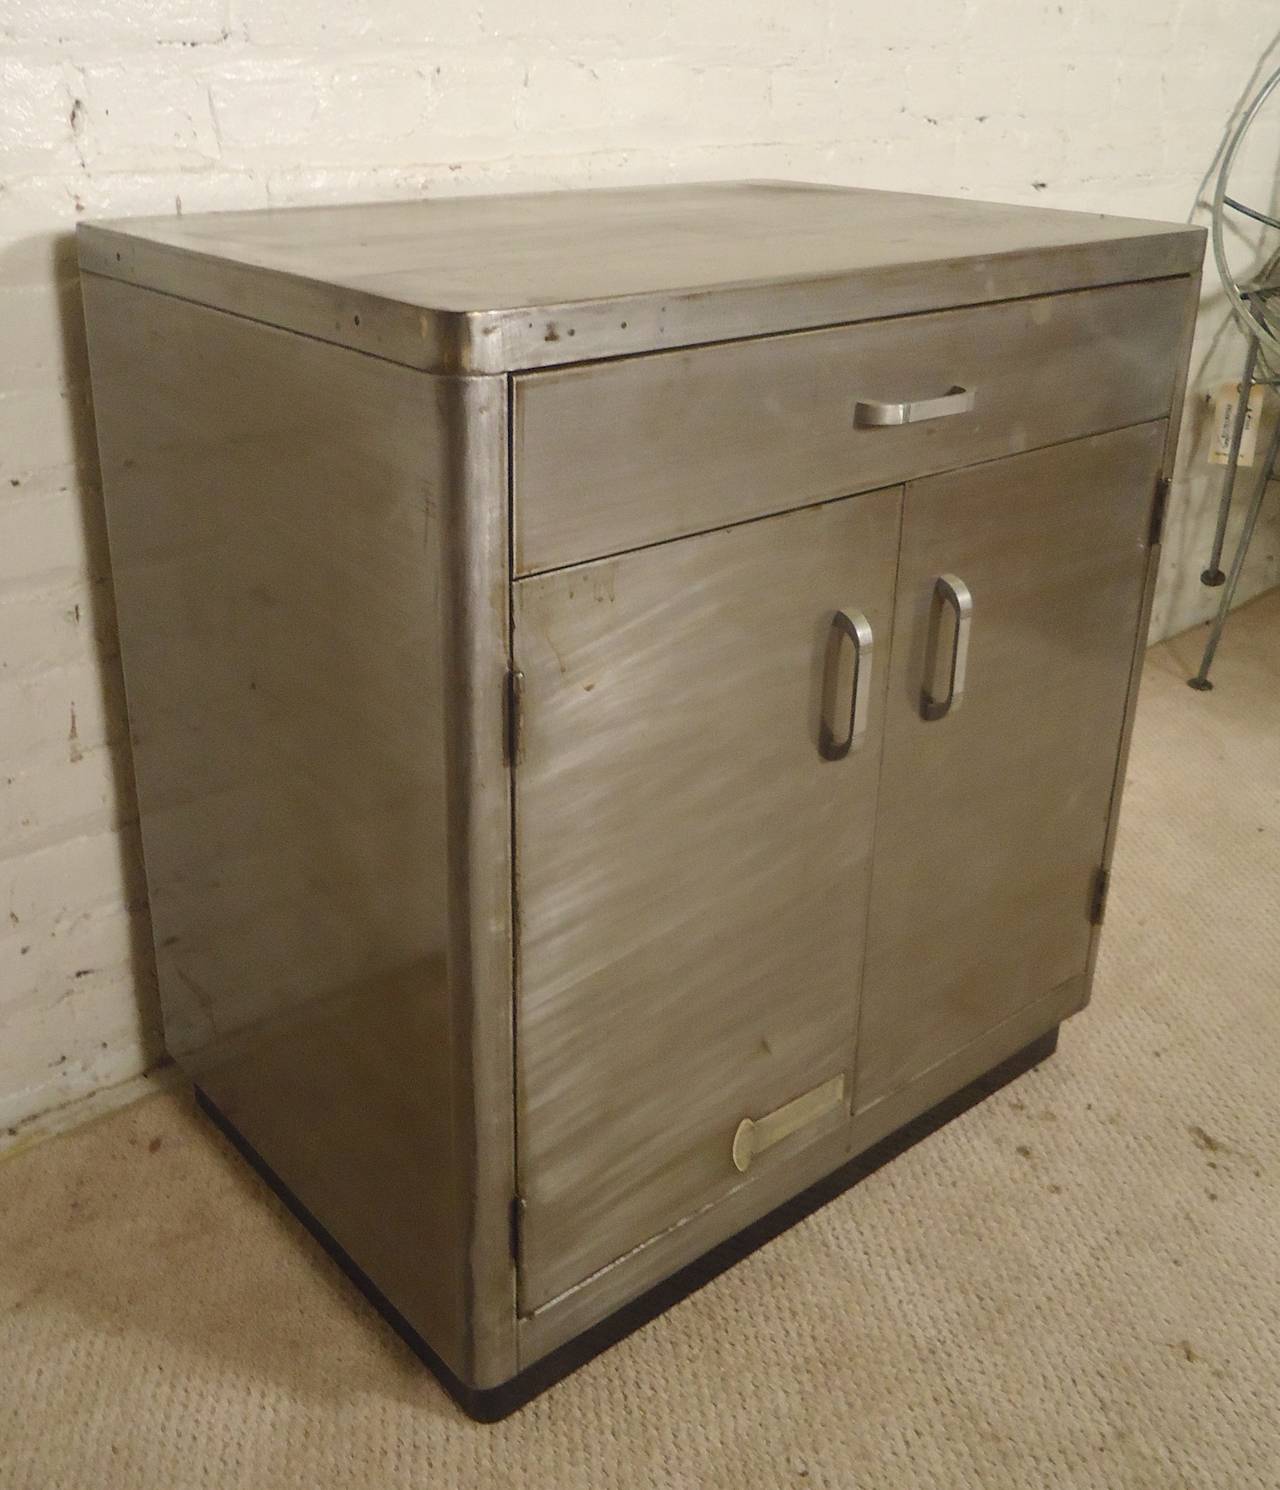 Vintage metal two door cabinet with fantastic bare metal style finish. Drawer and cabinet with shelf storage, original handles and accenting black trim bottom.

(Please confirm item location - NY or NJ - with dealer)